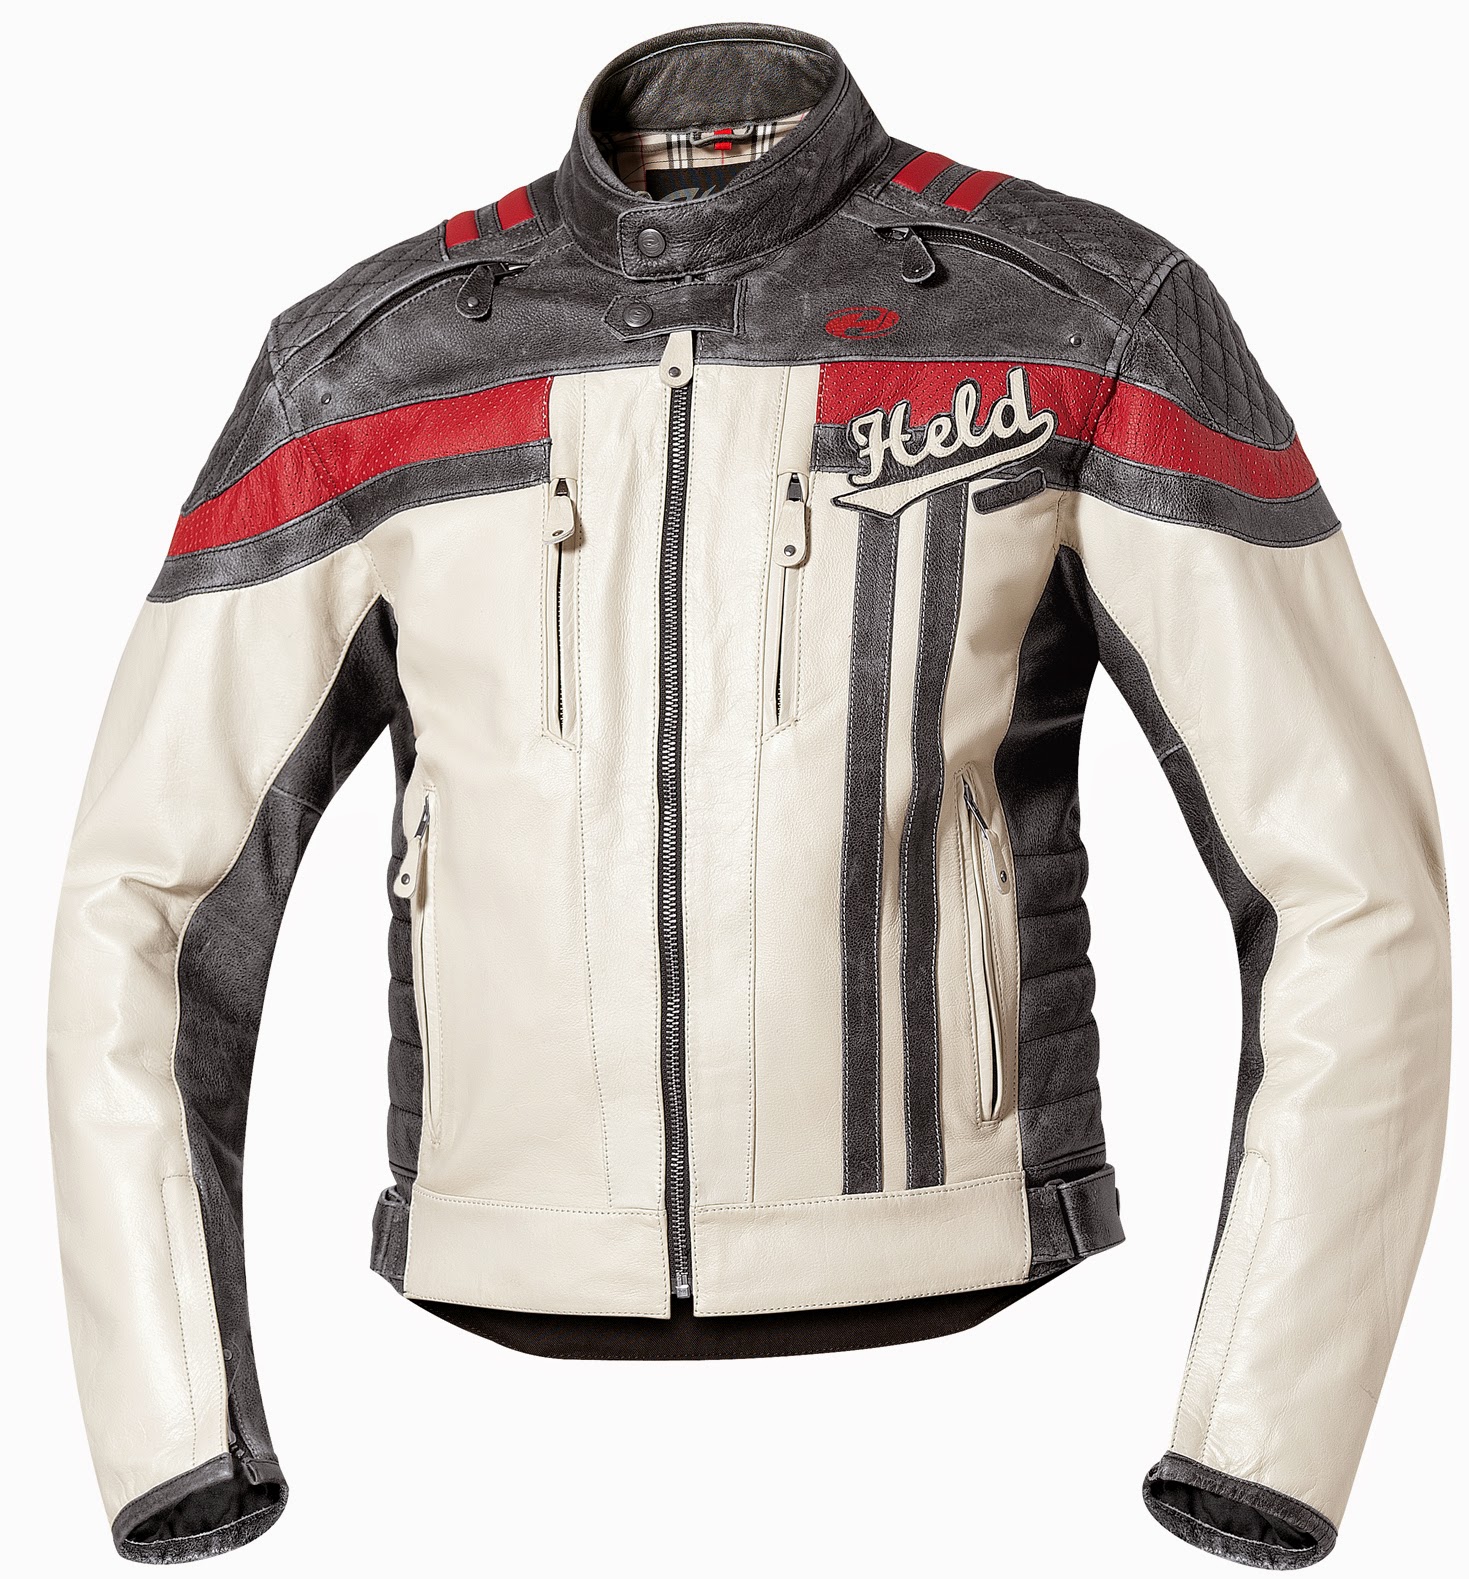 Held Bike Gear: One of our coolest Summer Retro leather jackets :)